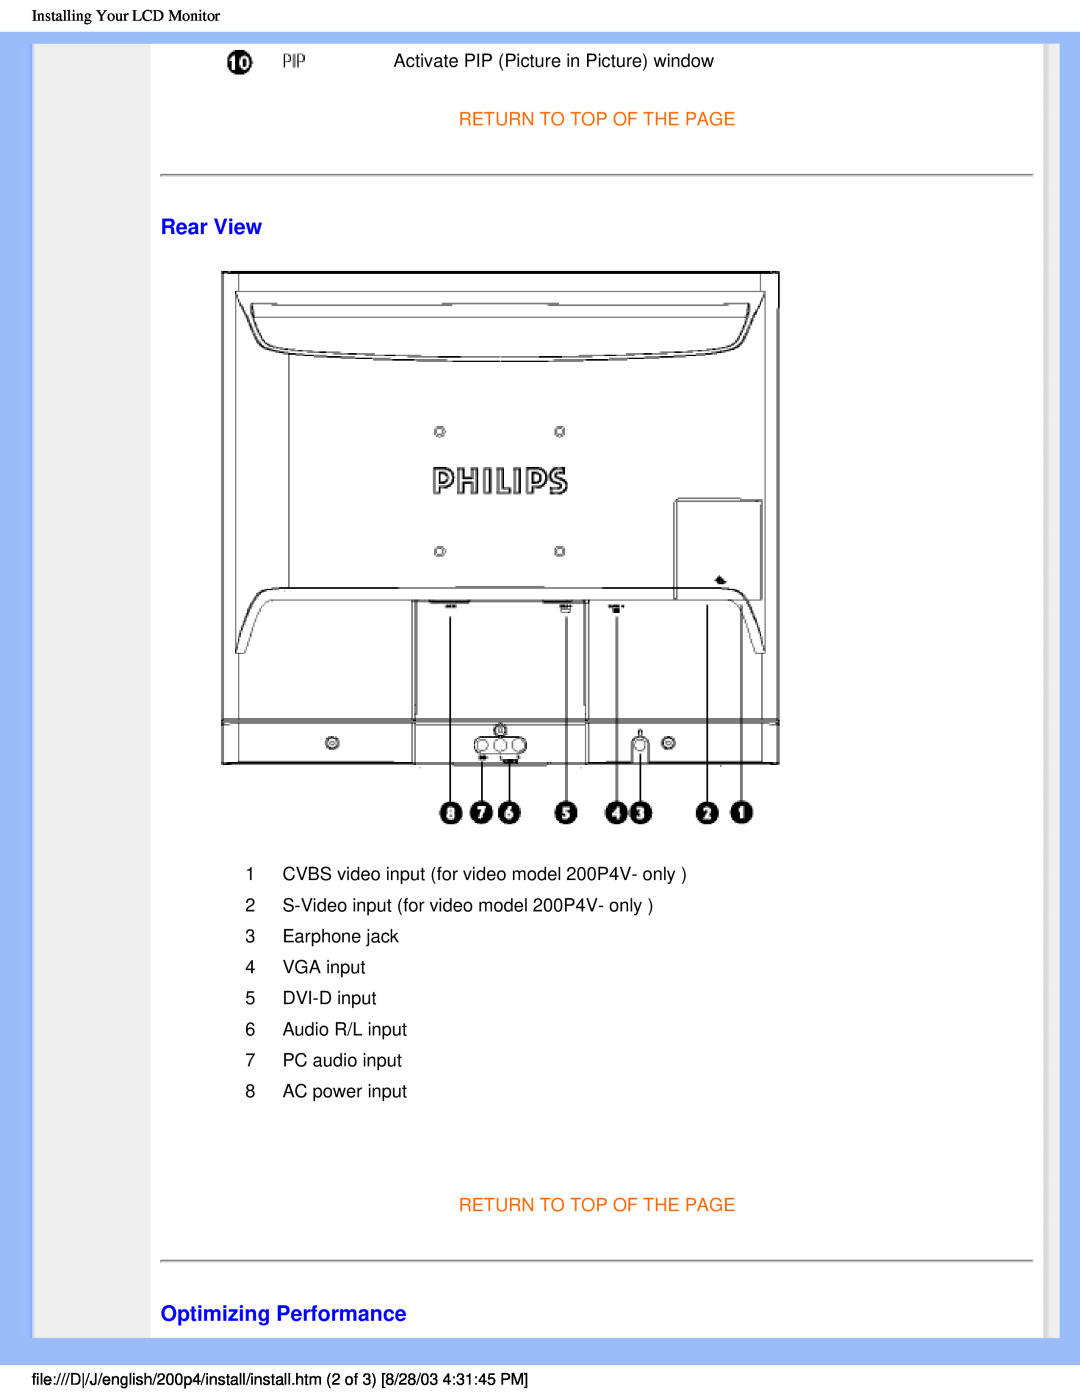 Philips 200P4 Rear View, Optimizing Performance, Activate PIP Picture in Picture window, Return To Top Of The Page 